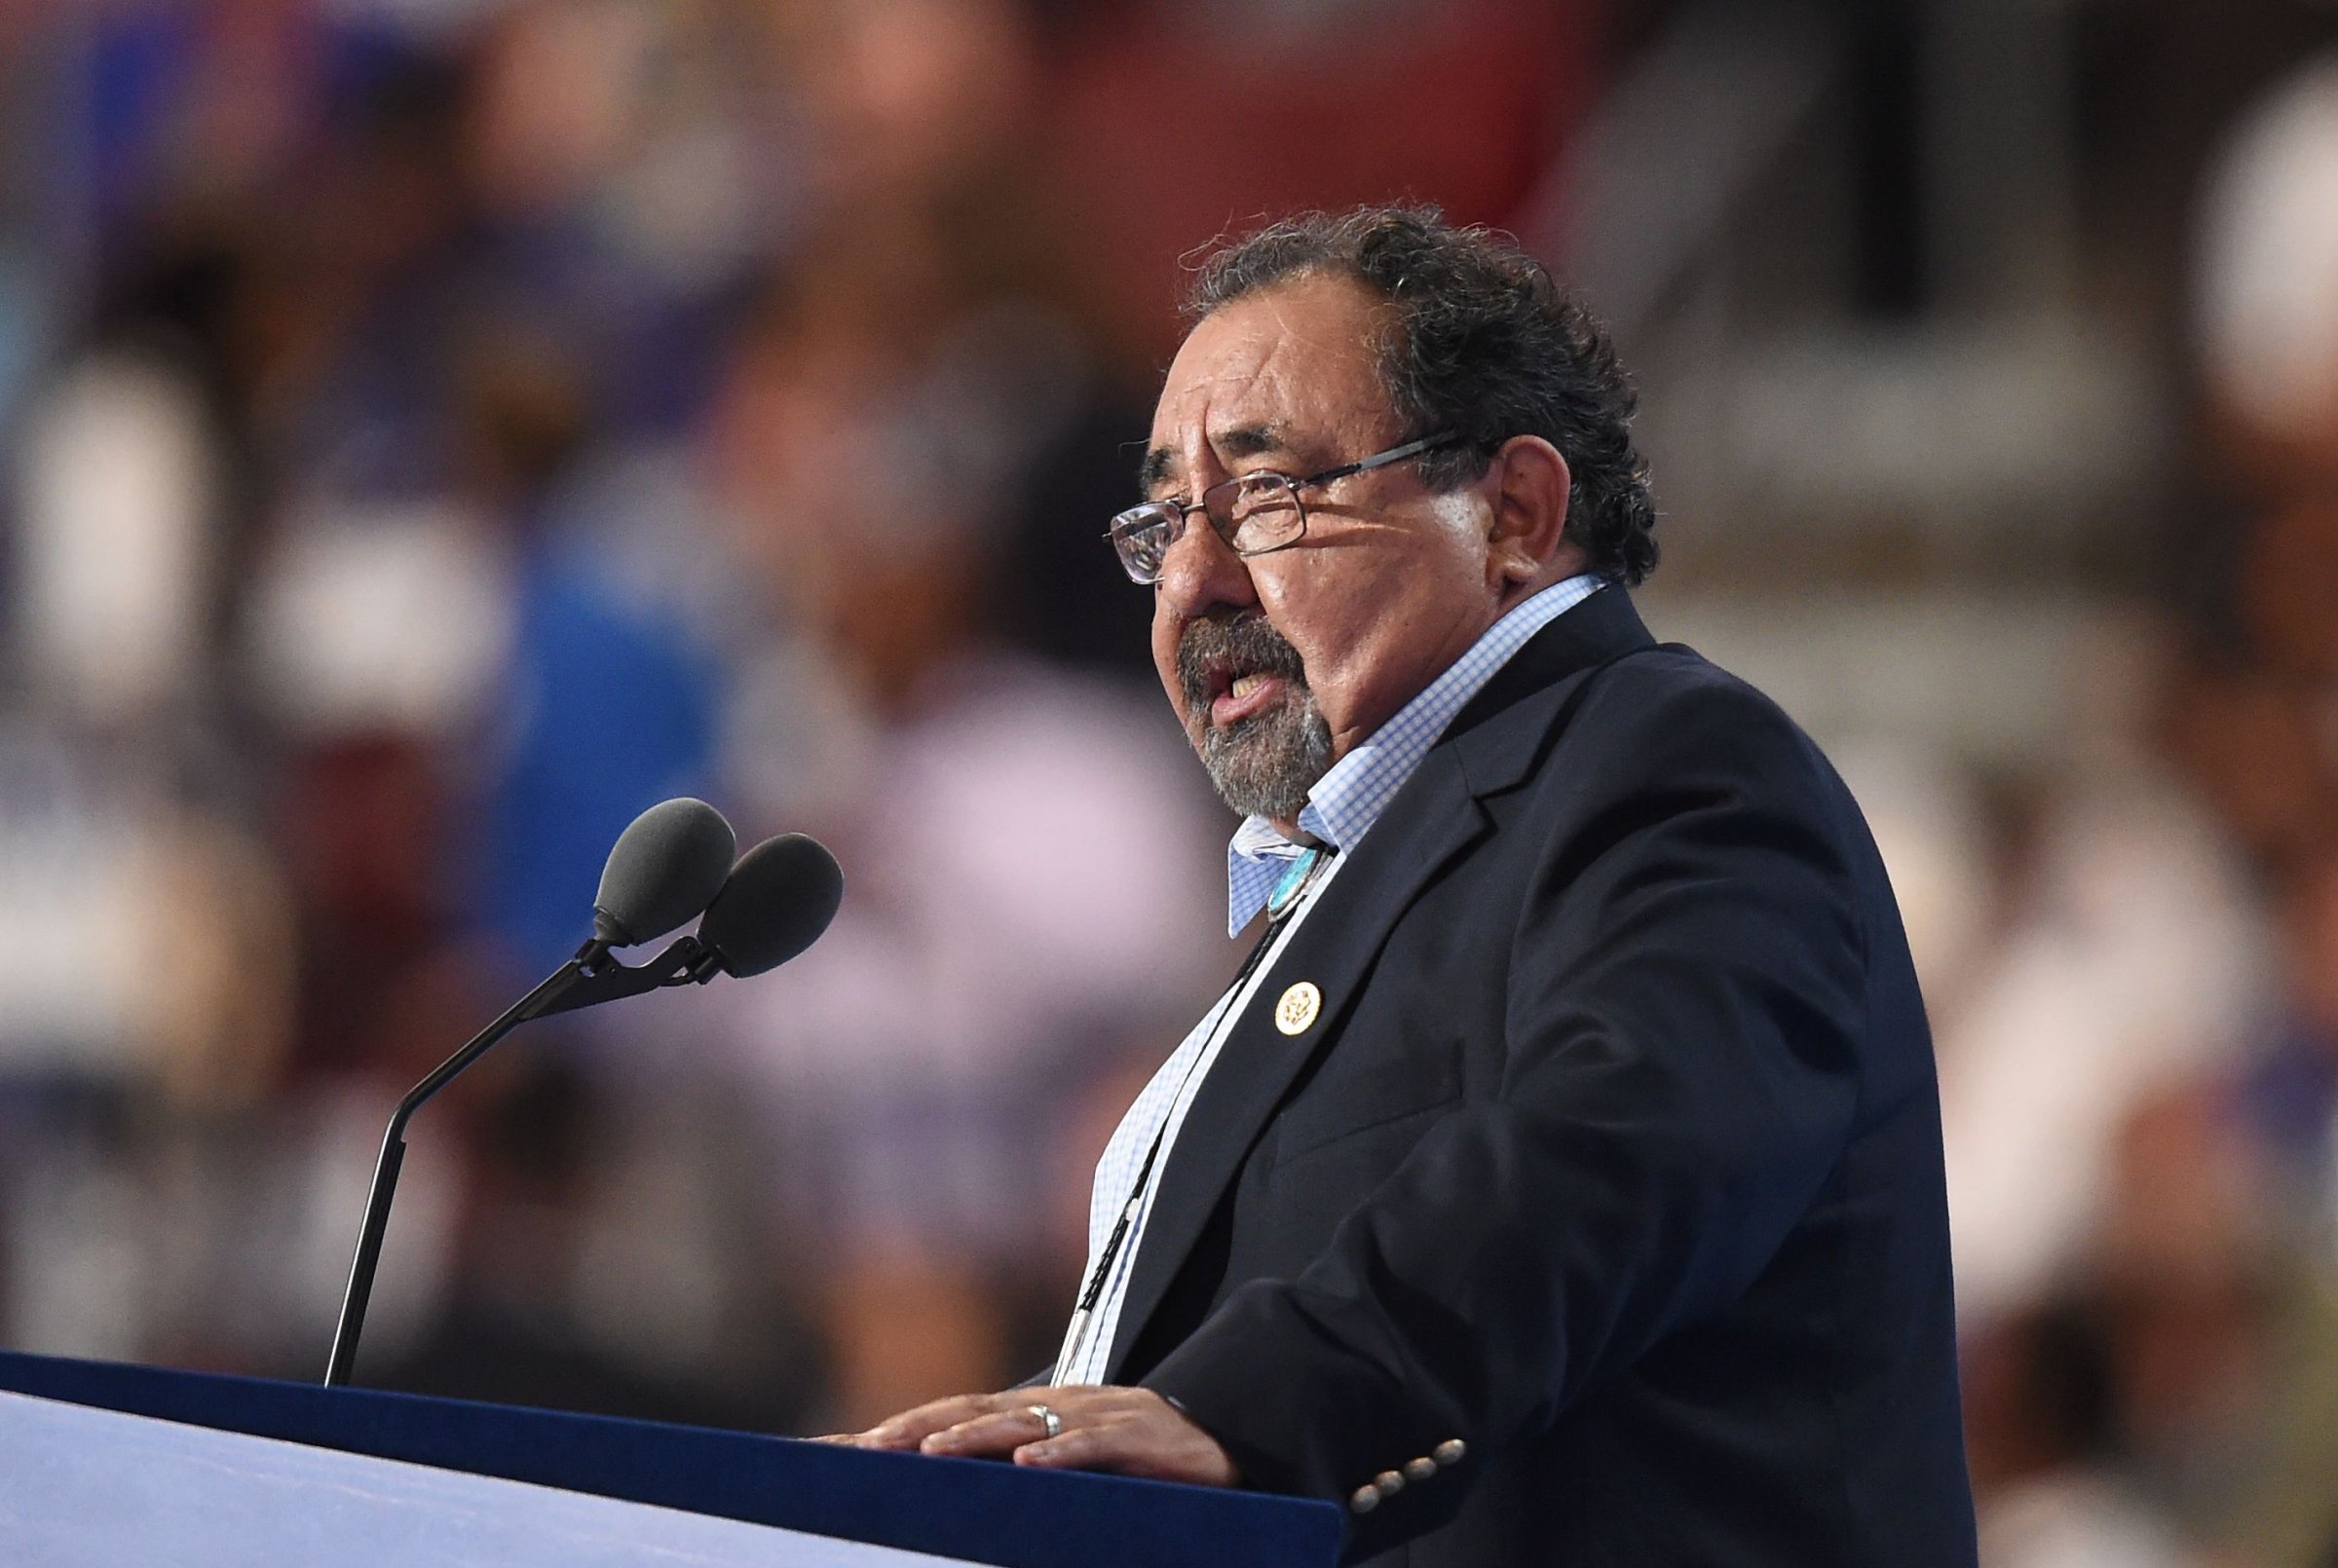 US House representative (AZ) Raul Grijalva speaks during Day 1 of the Democratic National Convention at the Wells Fargo Center in Philadelphia on July 25, 2016.